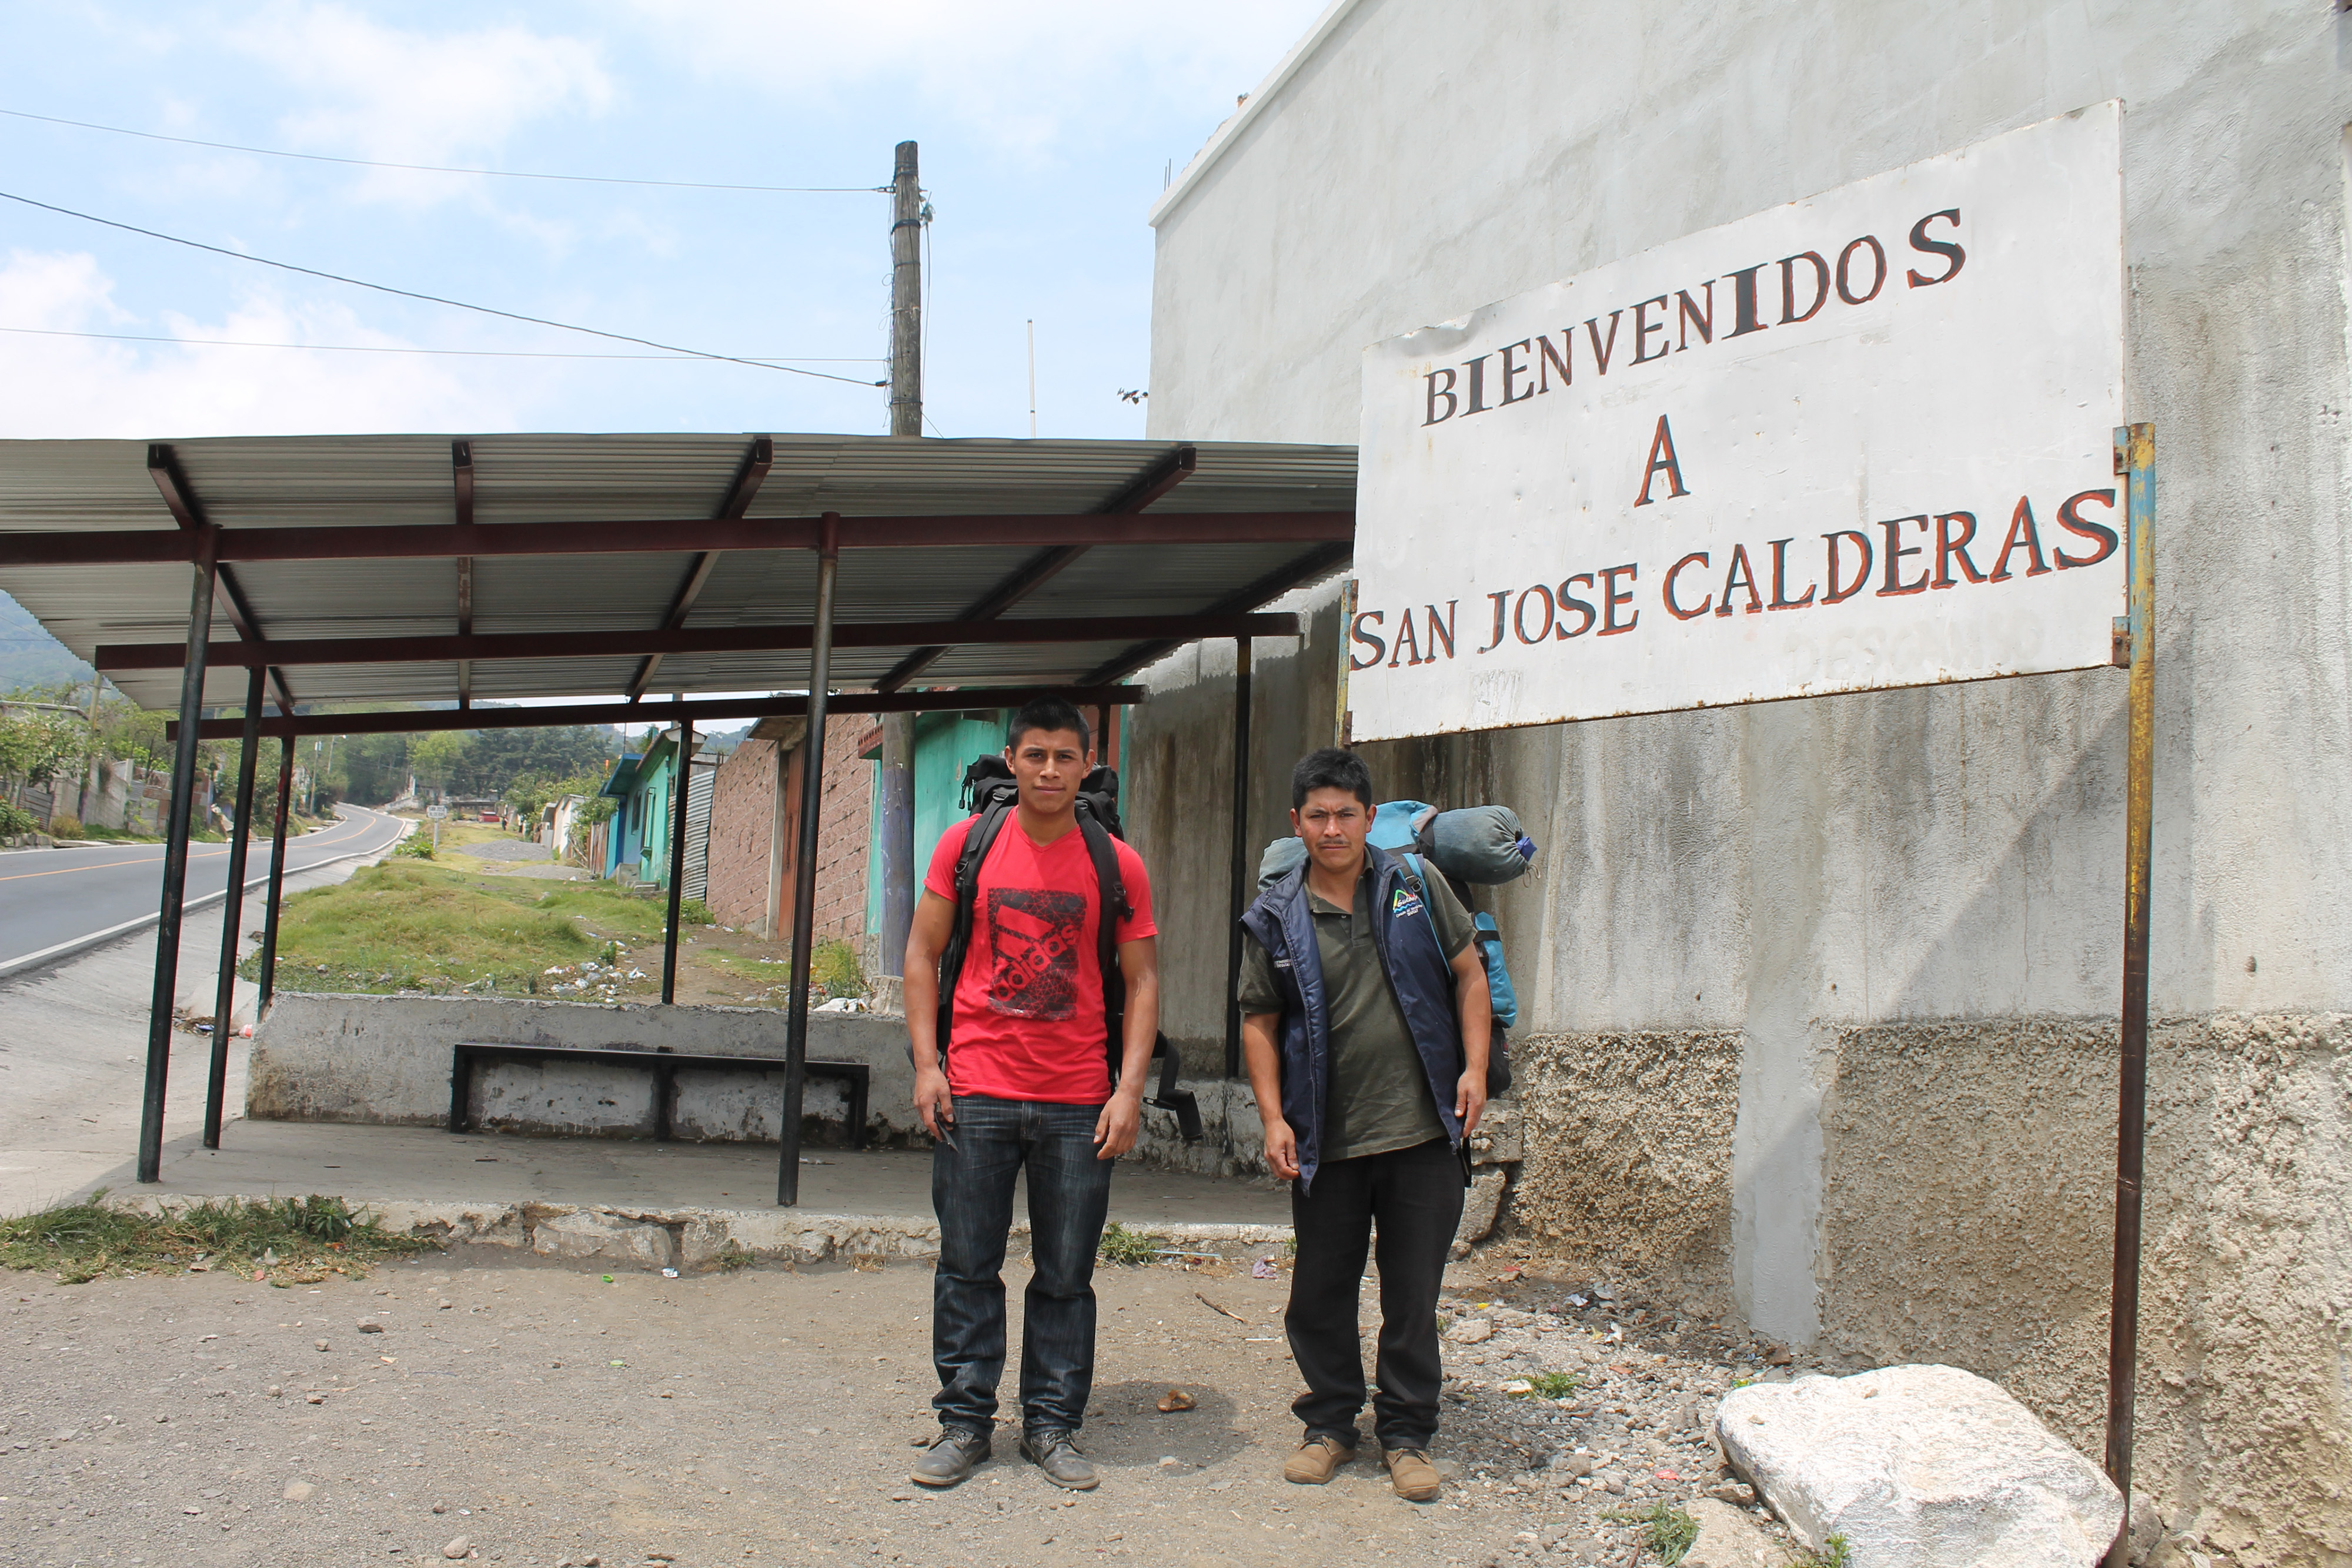 Two Aprode guides wait for tourists to arrive on the highway that leads to Acatenango [Martha Pskowski/Al Jazeera]